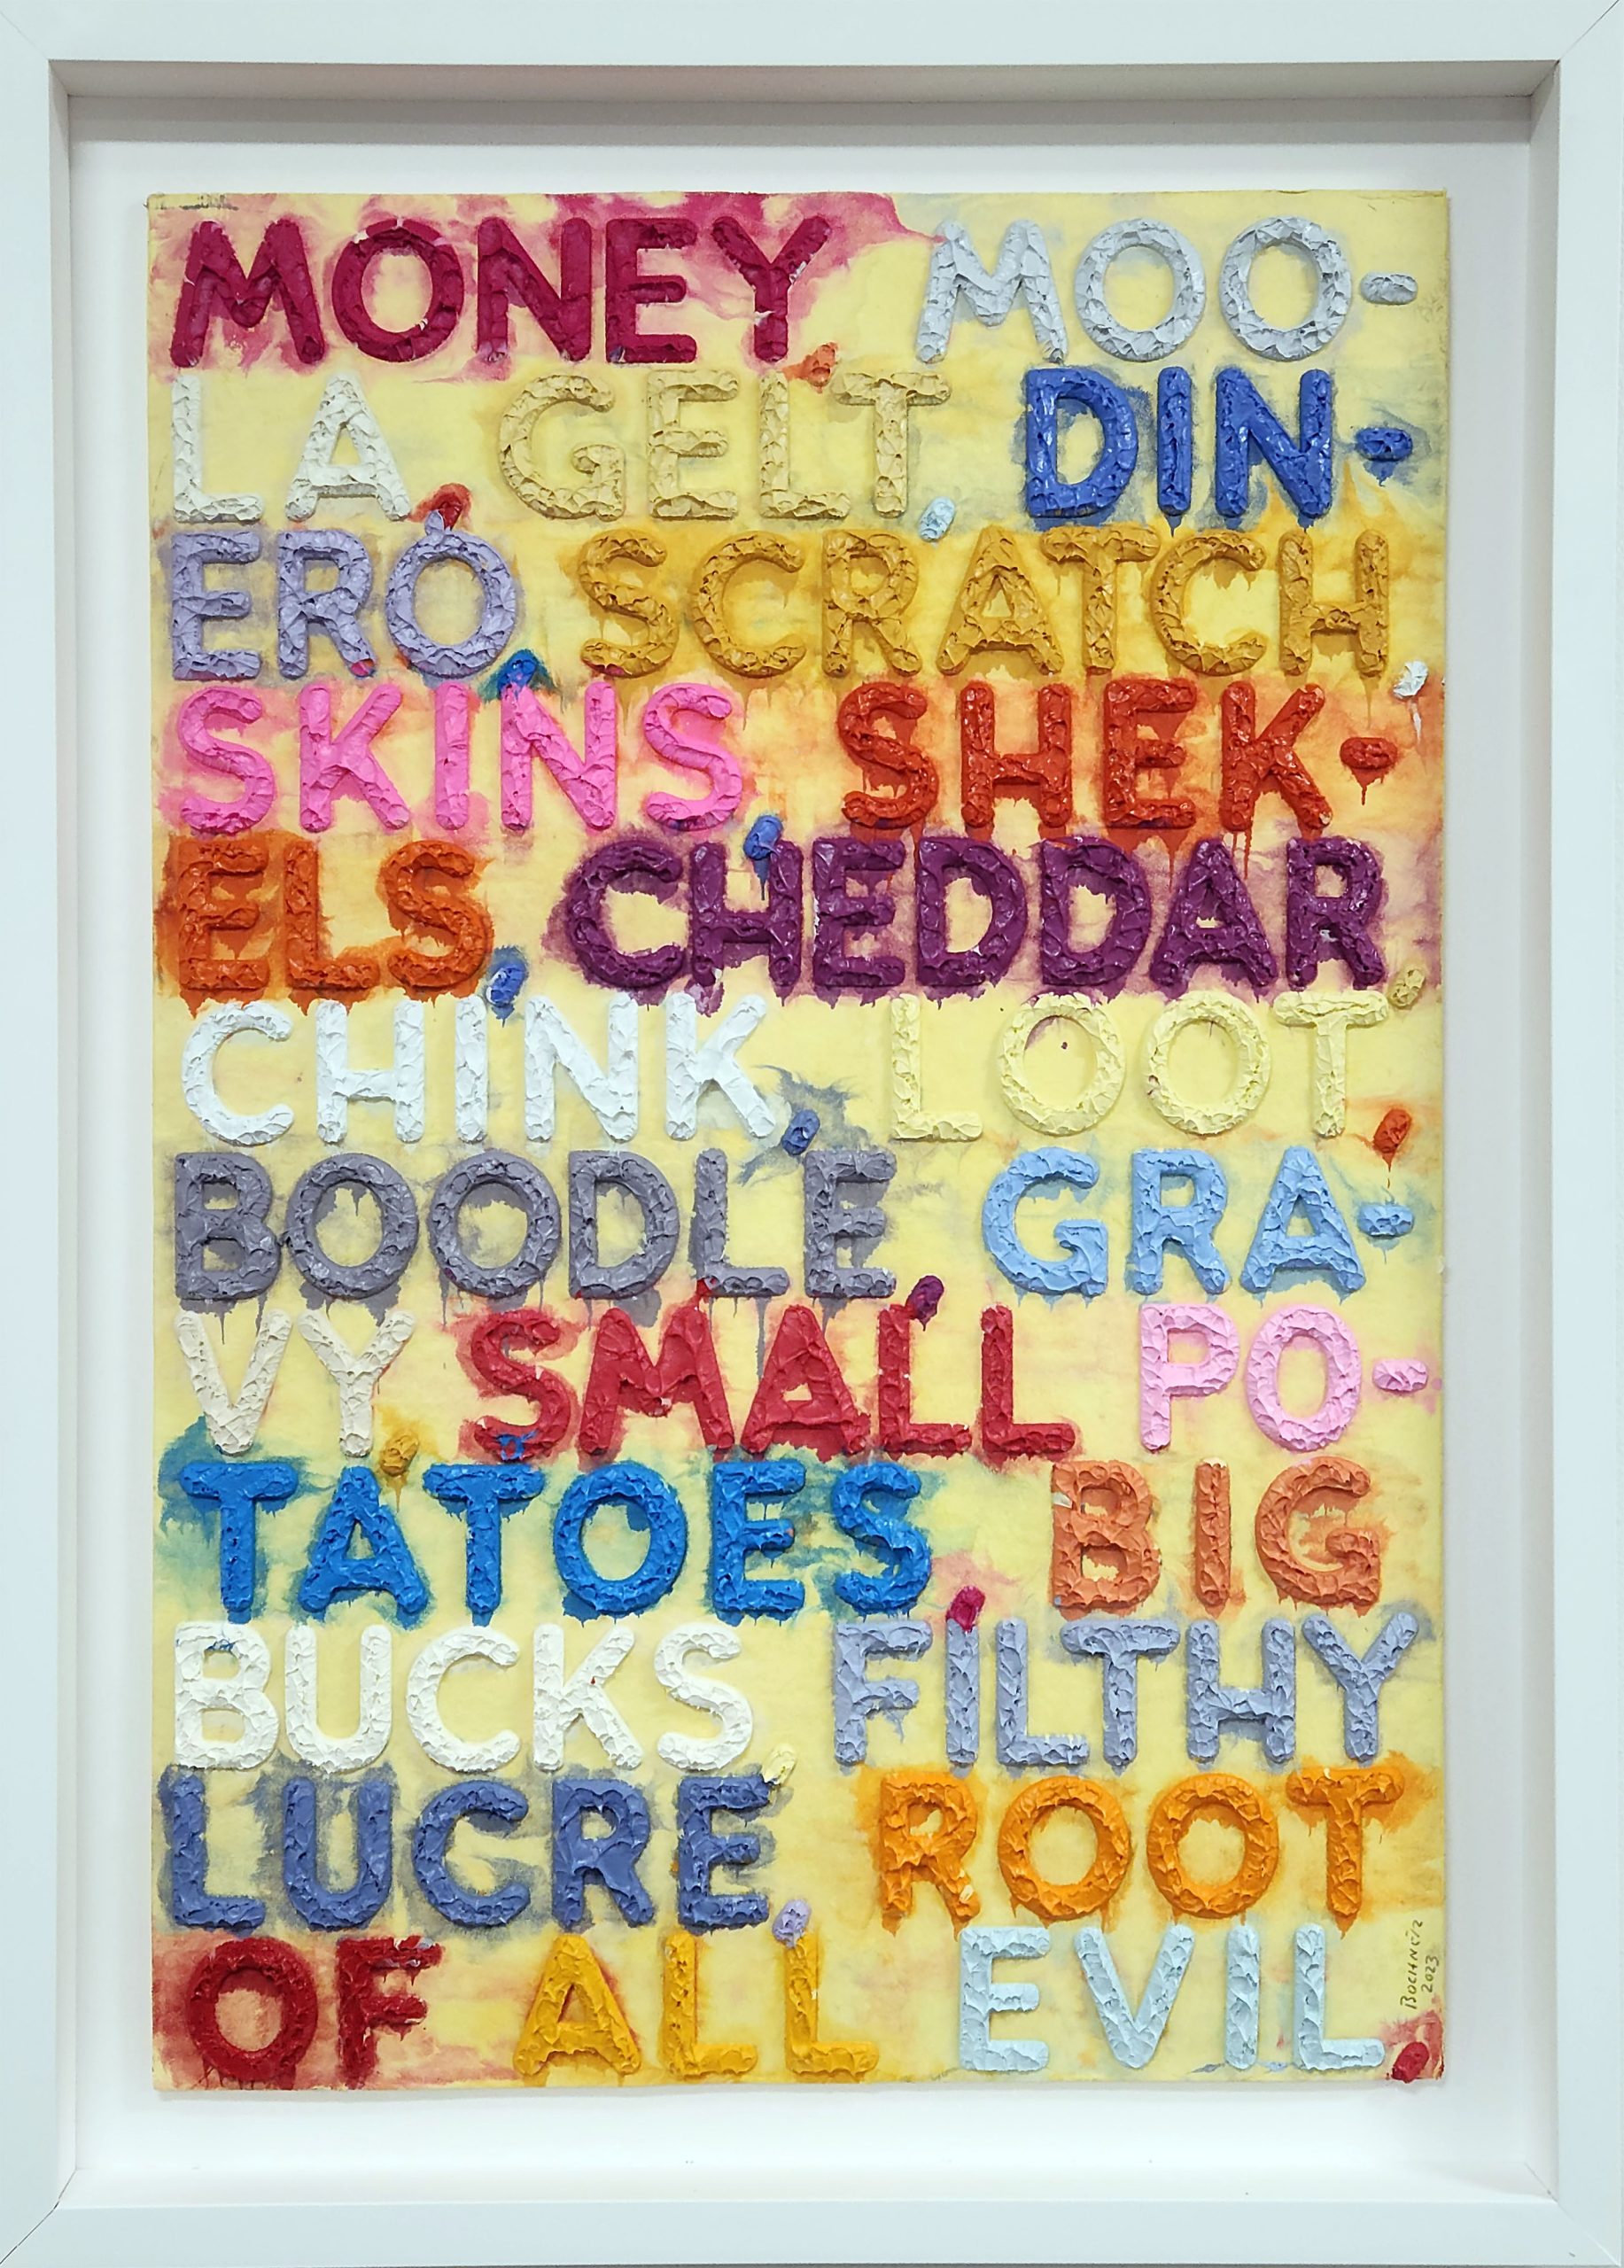 "Money" monoprint in oil with collage, engraving and embossment on handmade paper by artist Mel Bochner